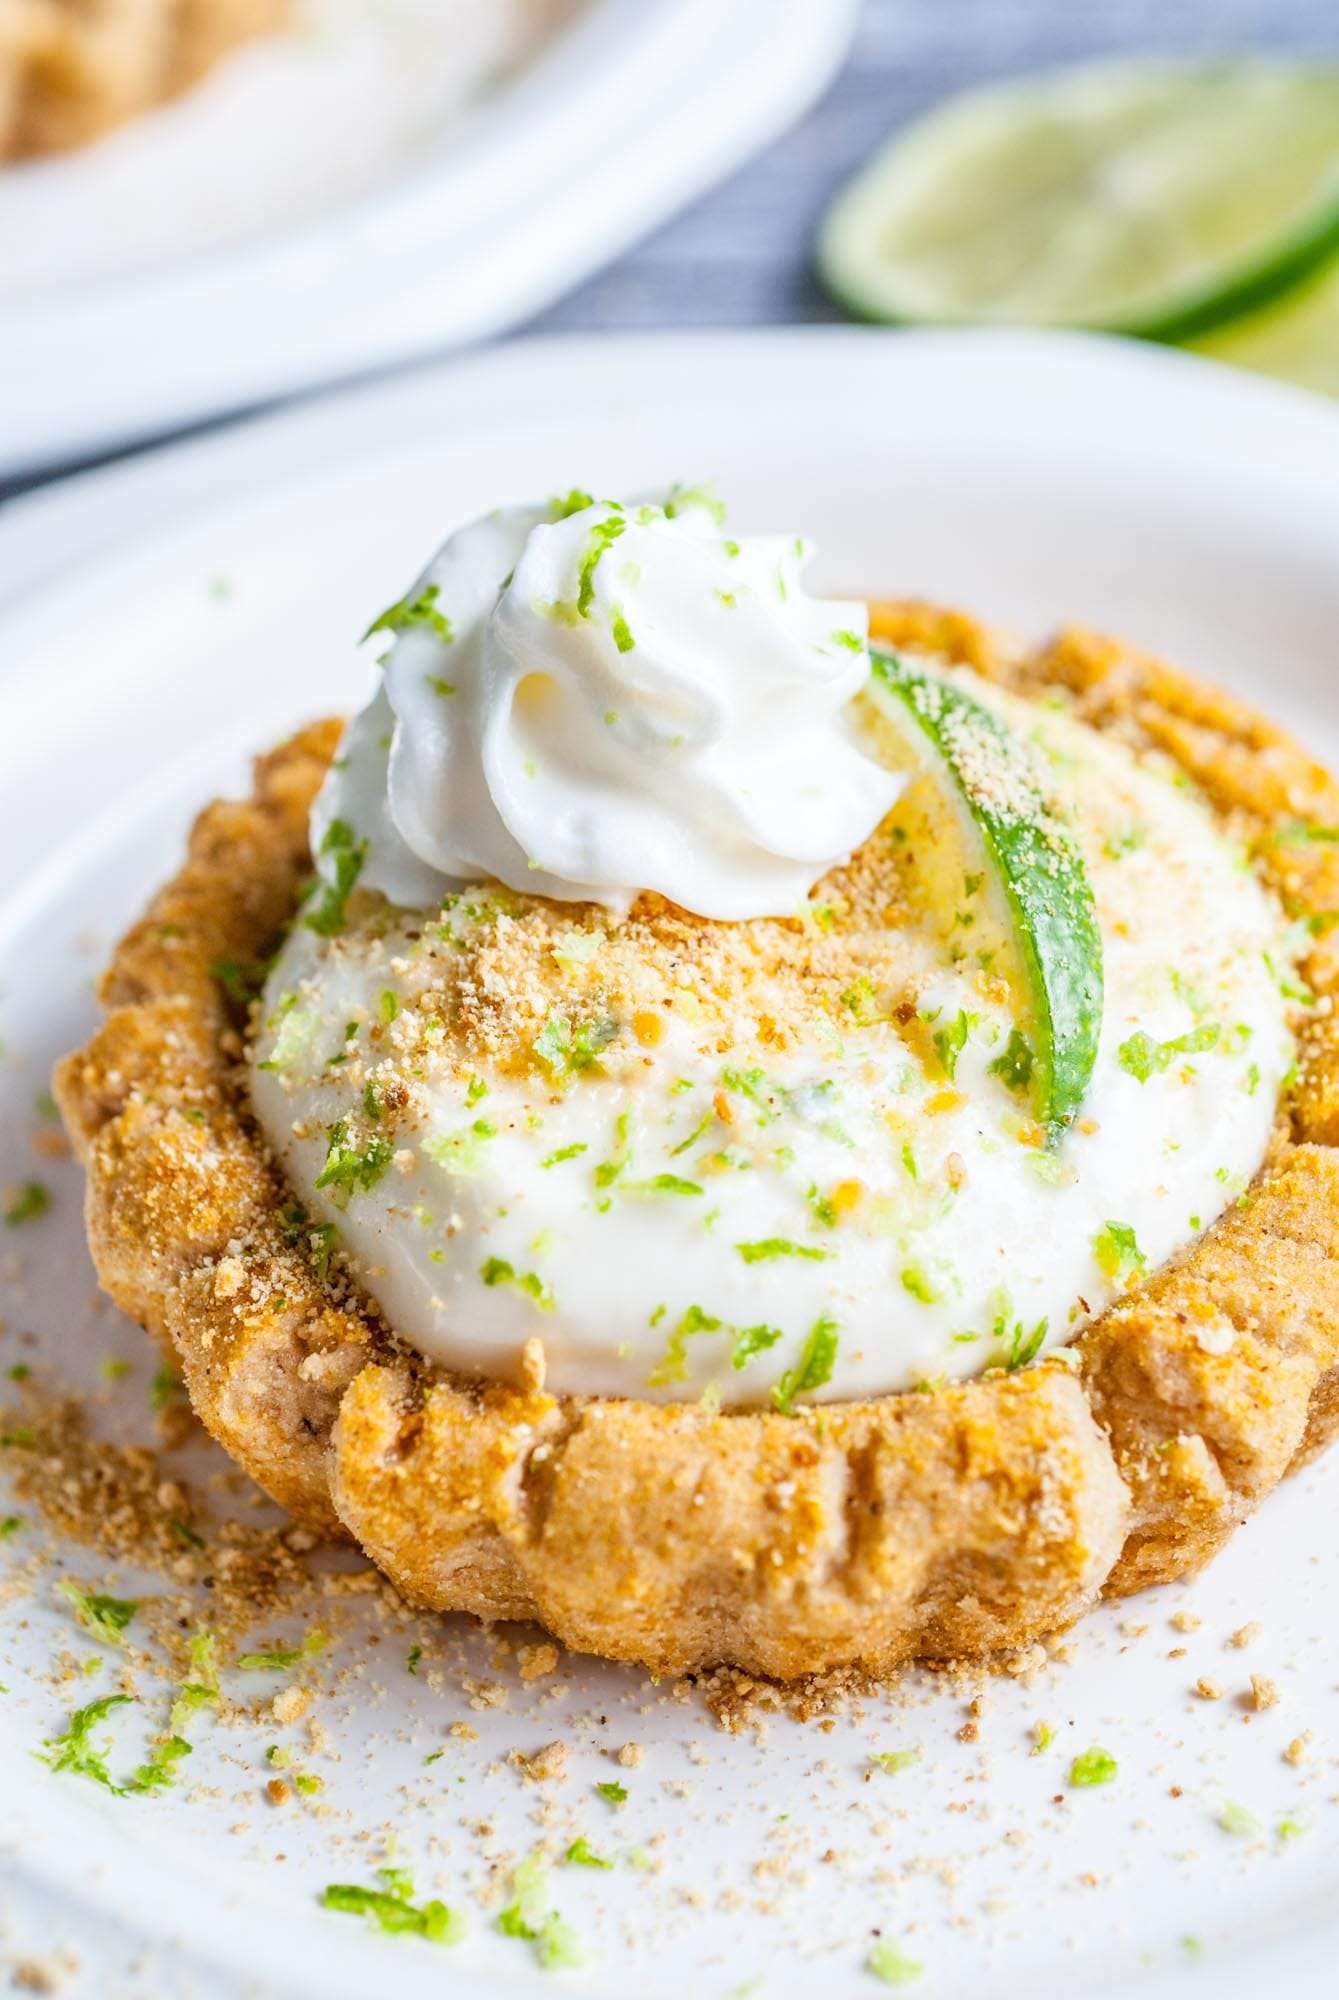 Crumbl key lime cookie